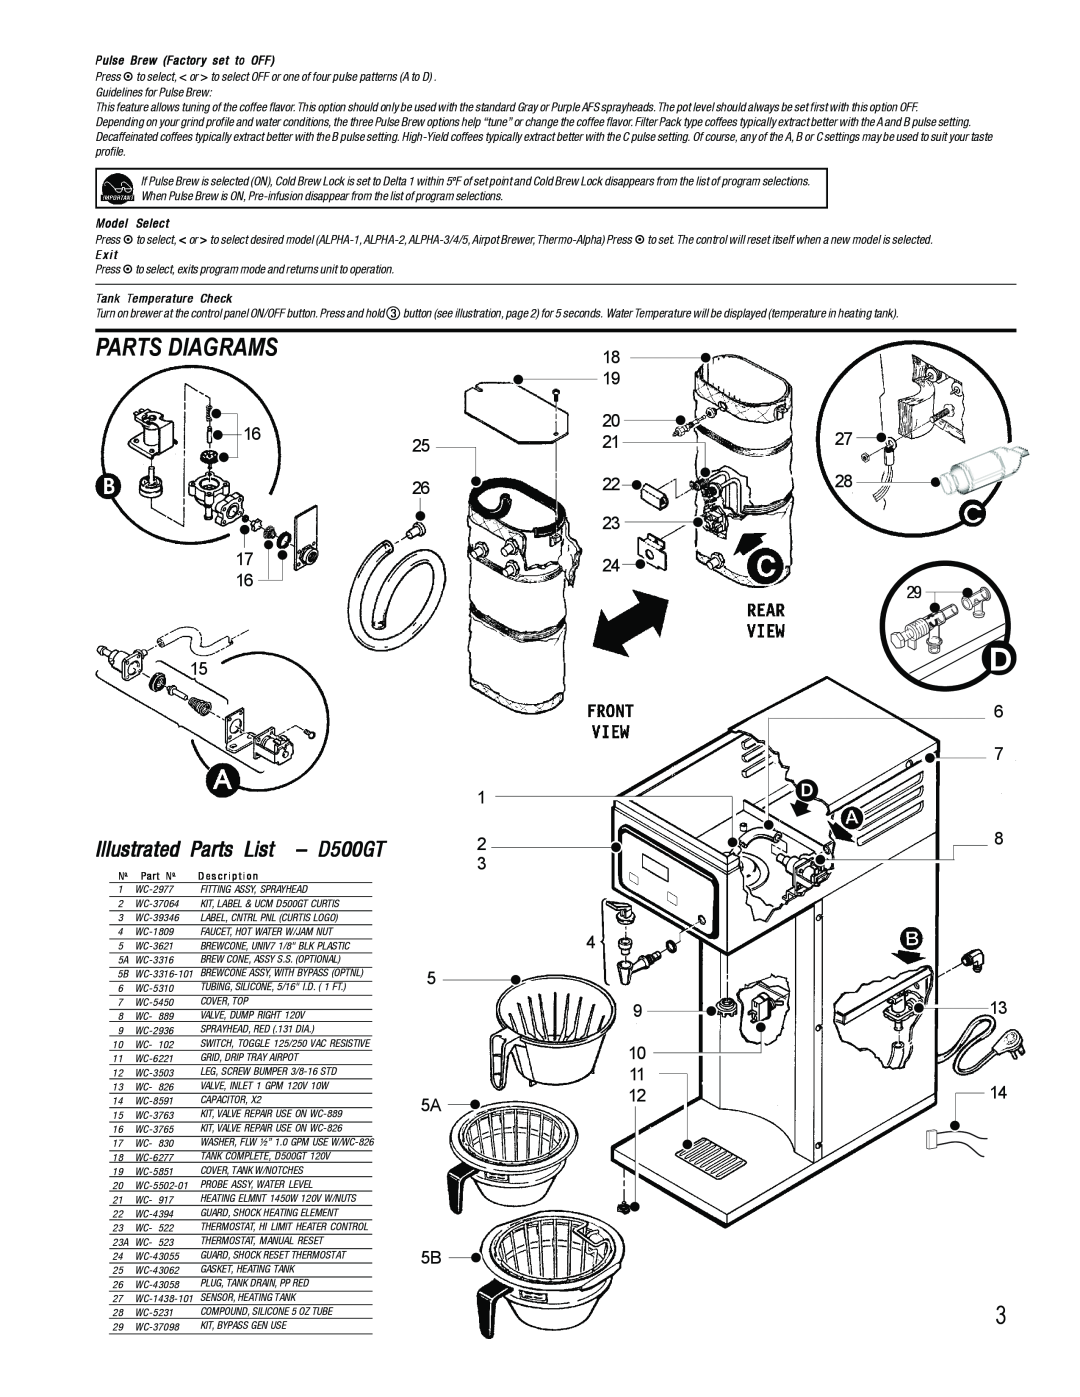 Wibur Curtis Company specifications Illustrated Parts List - D500GT, 5A 5B, Parts Diagrams 